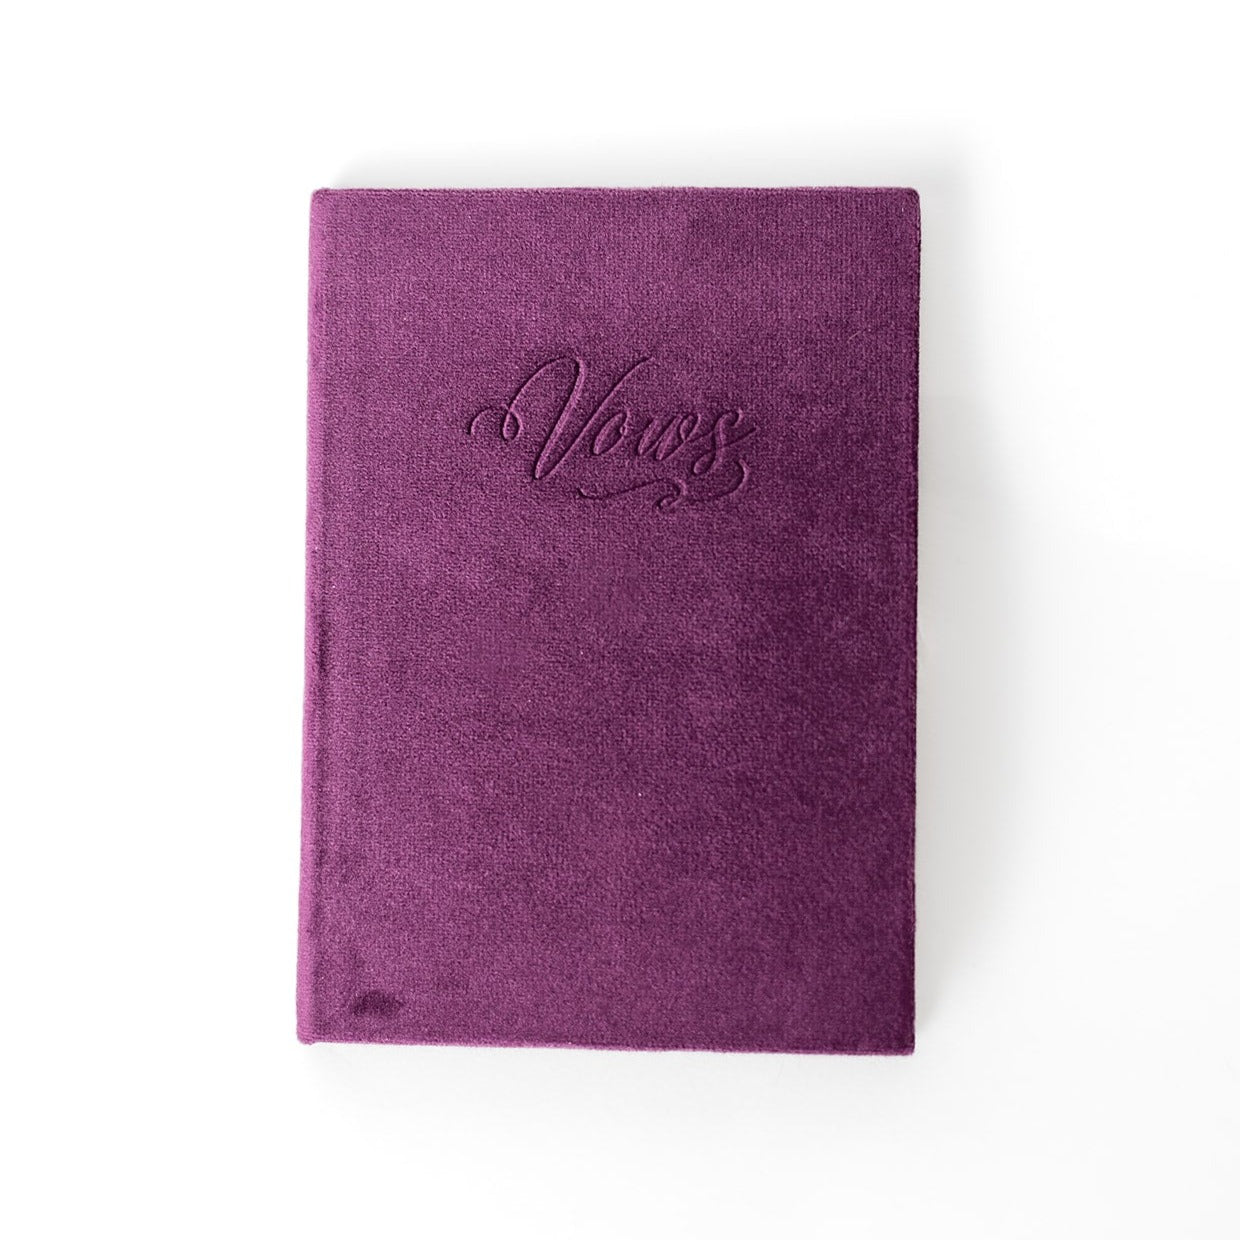 A plum-coloured vow book with the word "Vows" embossed on the front cover.